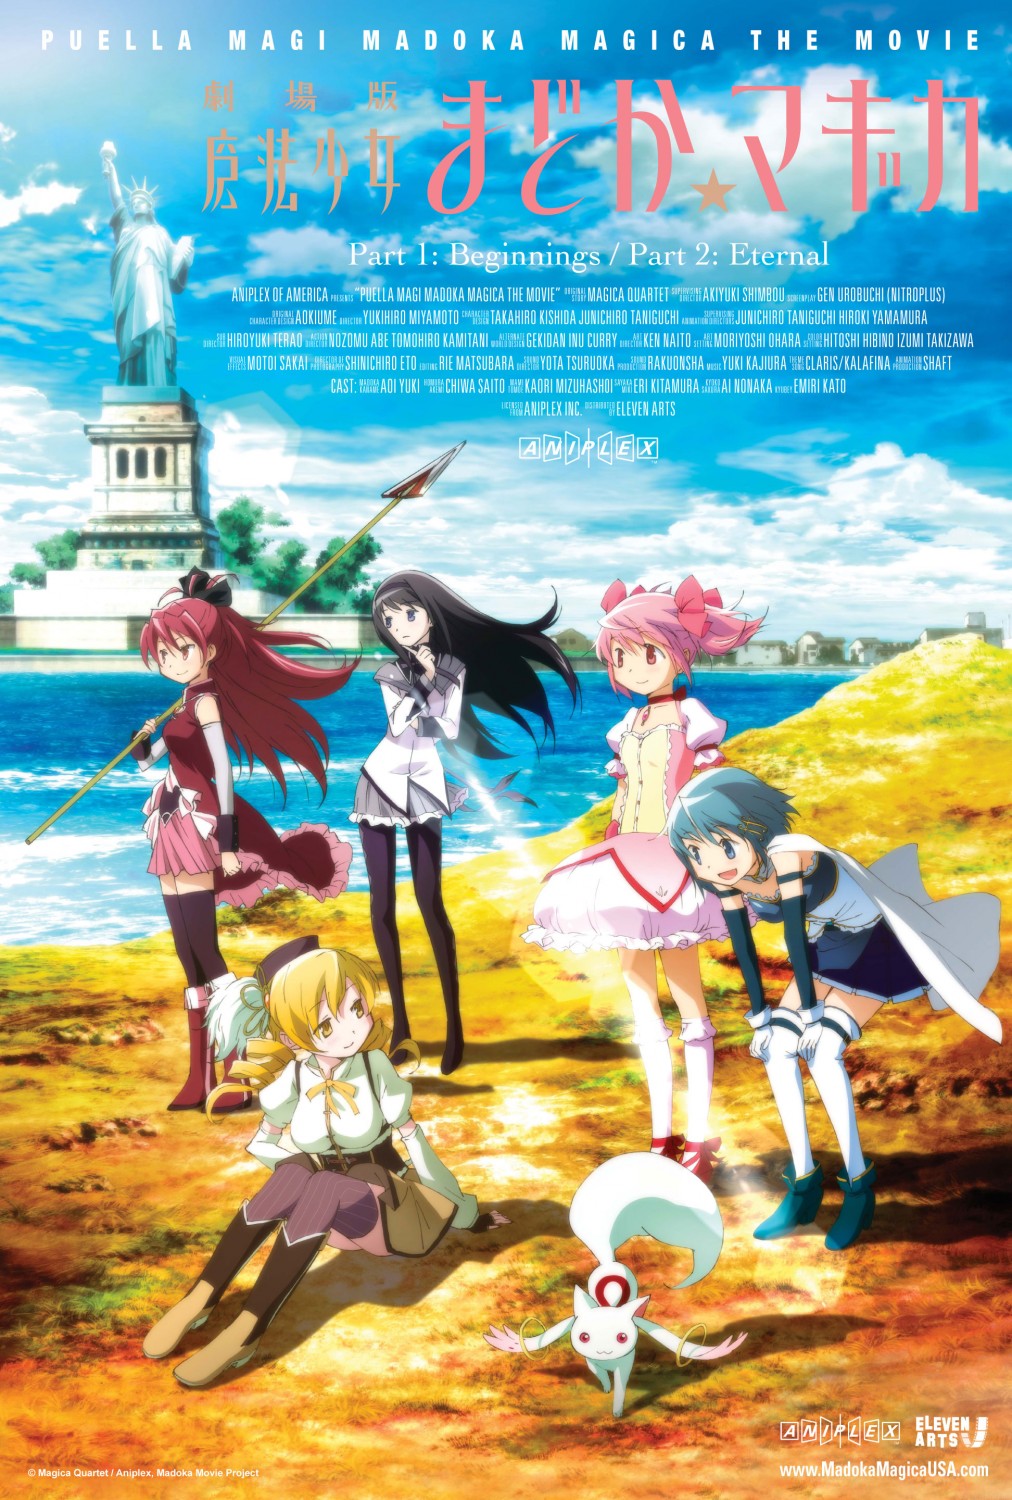 Extra Large Movie Poster Image for Puella Magi Madoka Magica the Movie Part I: The Beginning Story (#2 of 3)